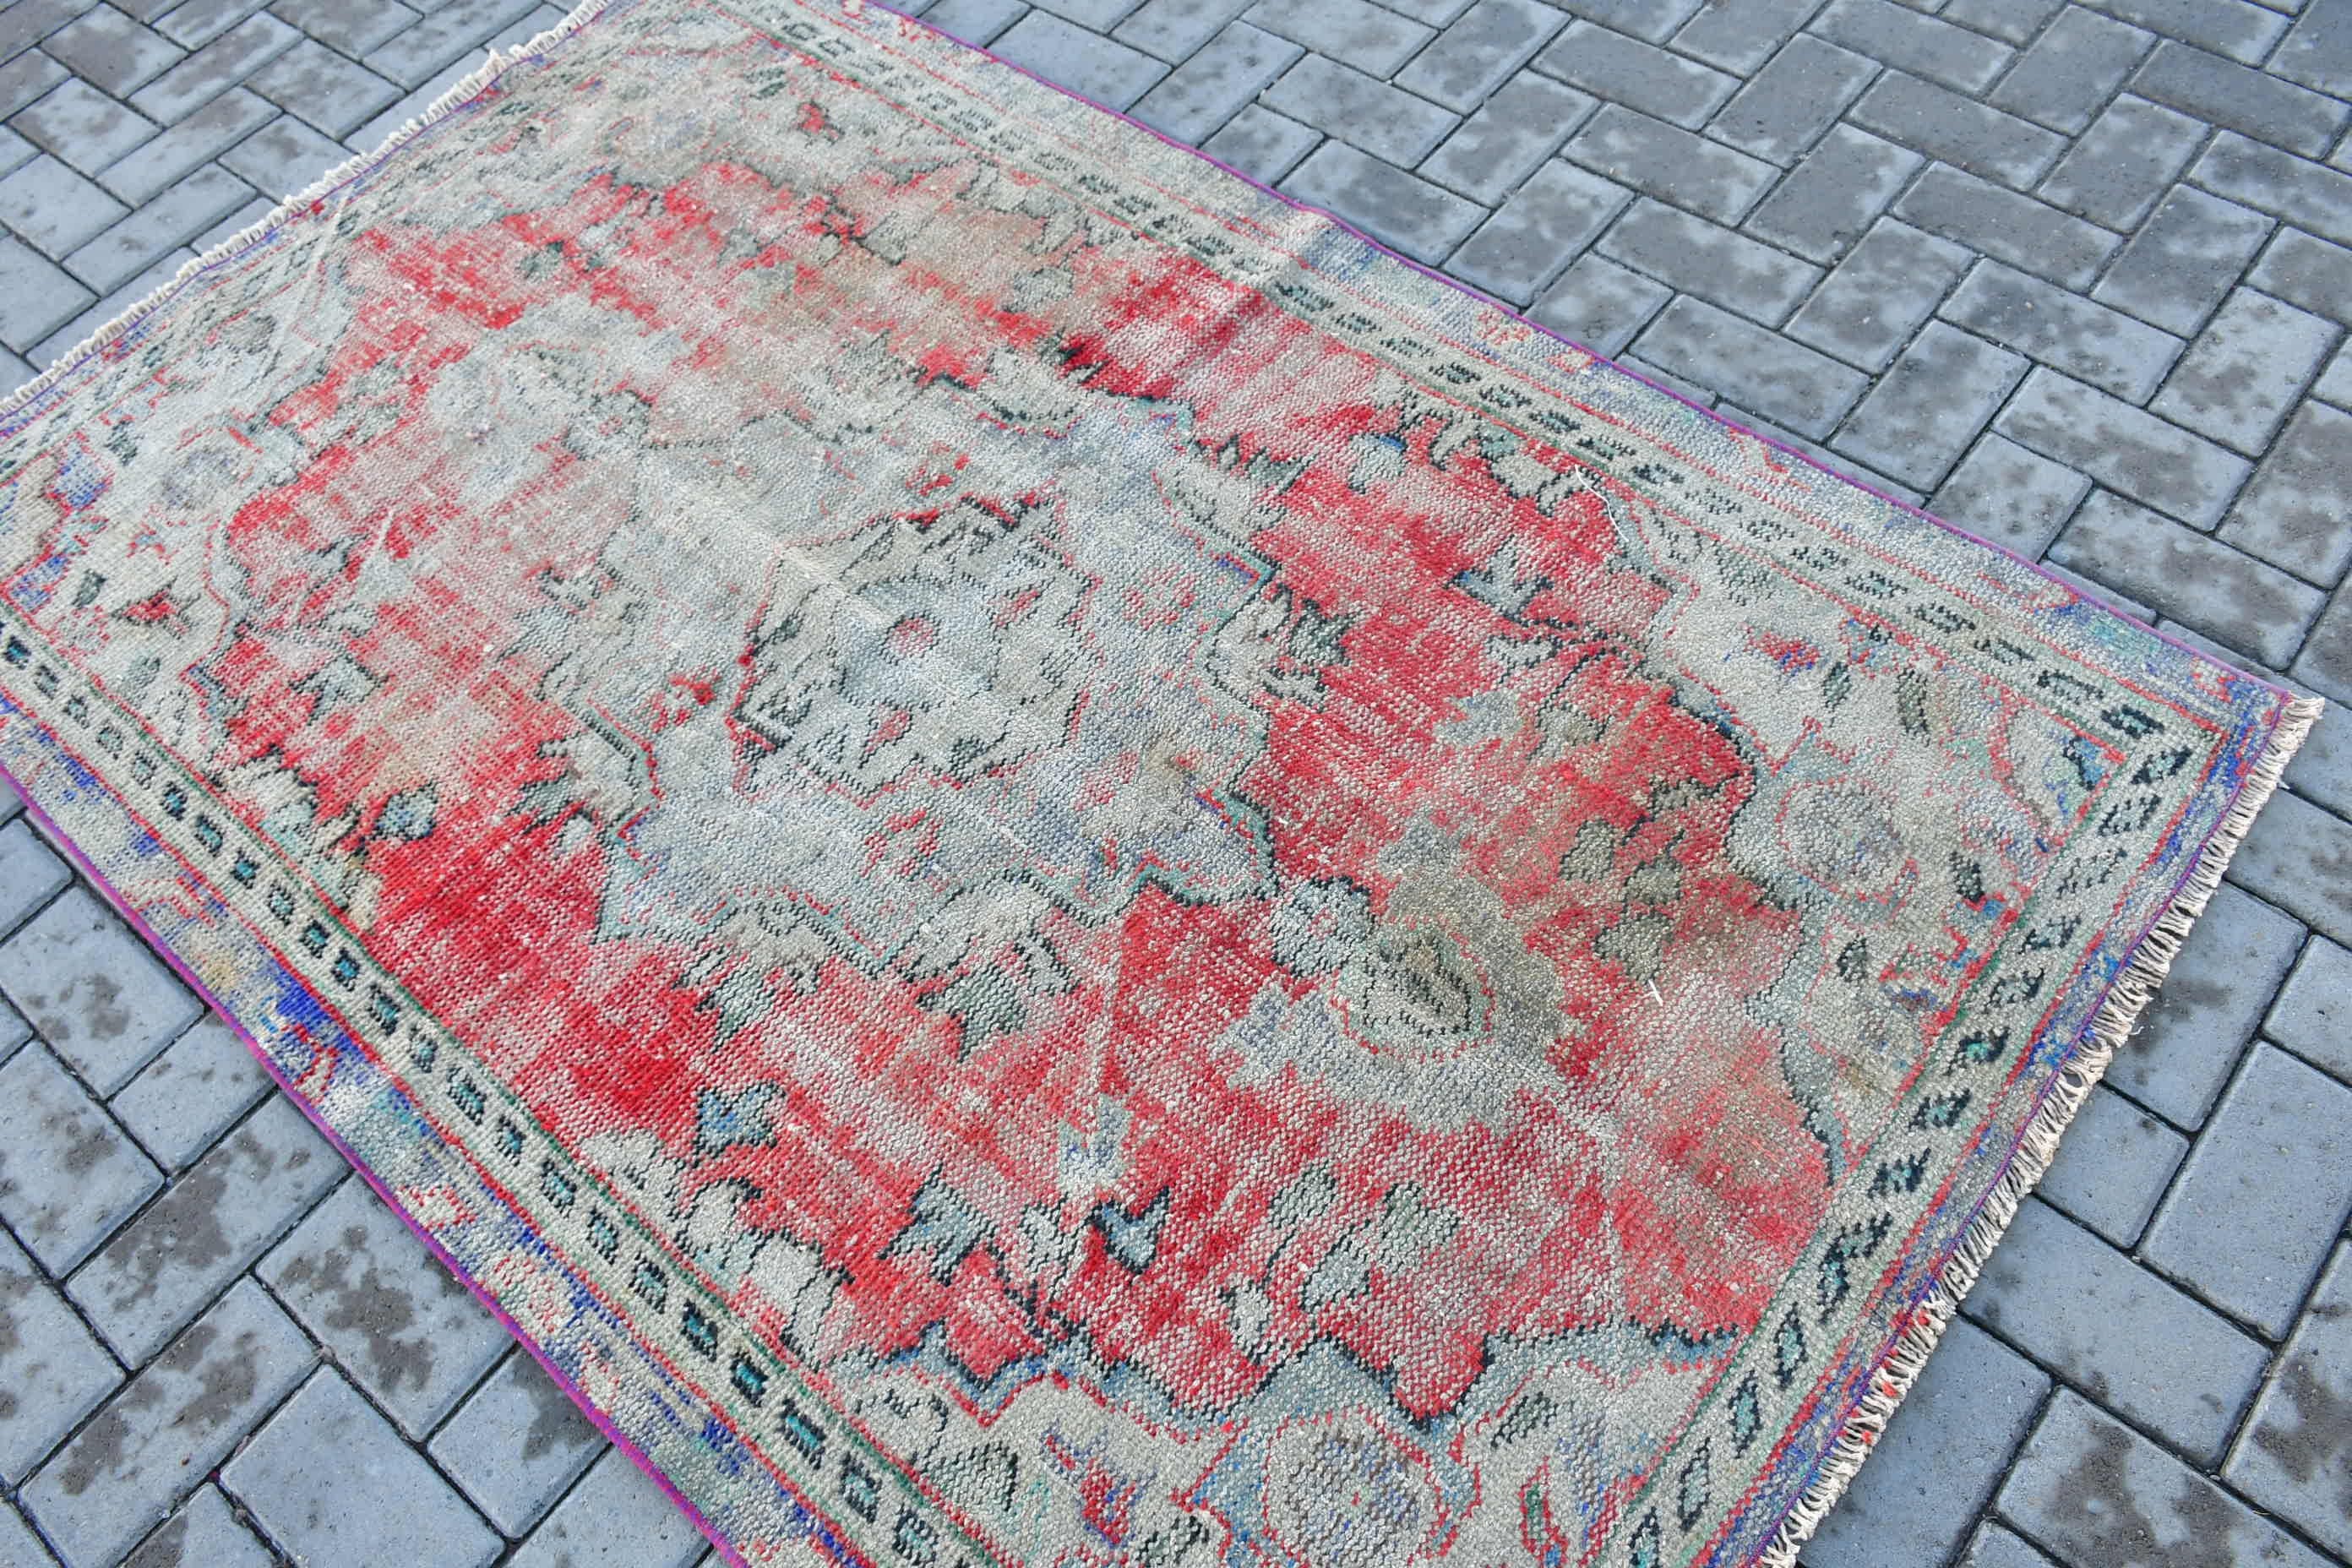 Red Anatolian Rug, Turkish Rug, Antique Rugs, Handwoven Rug, 4x6.1 ft Area Rugs, Home Decor Rug, Vintage Rug, Dining Room Rugs, Indoor Rug